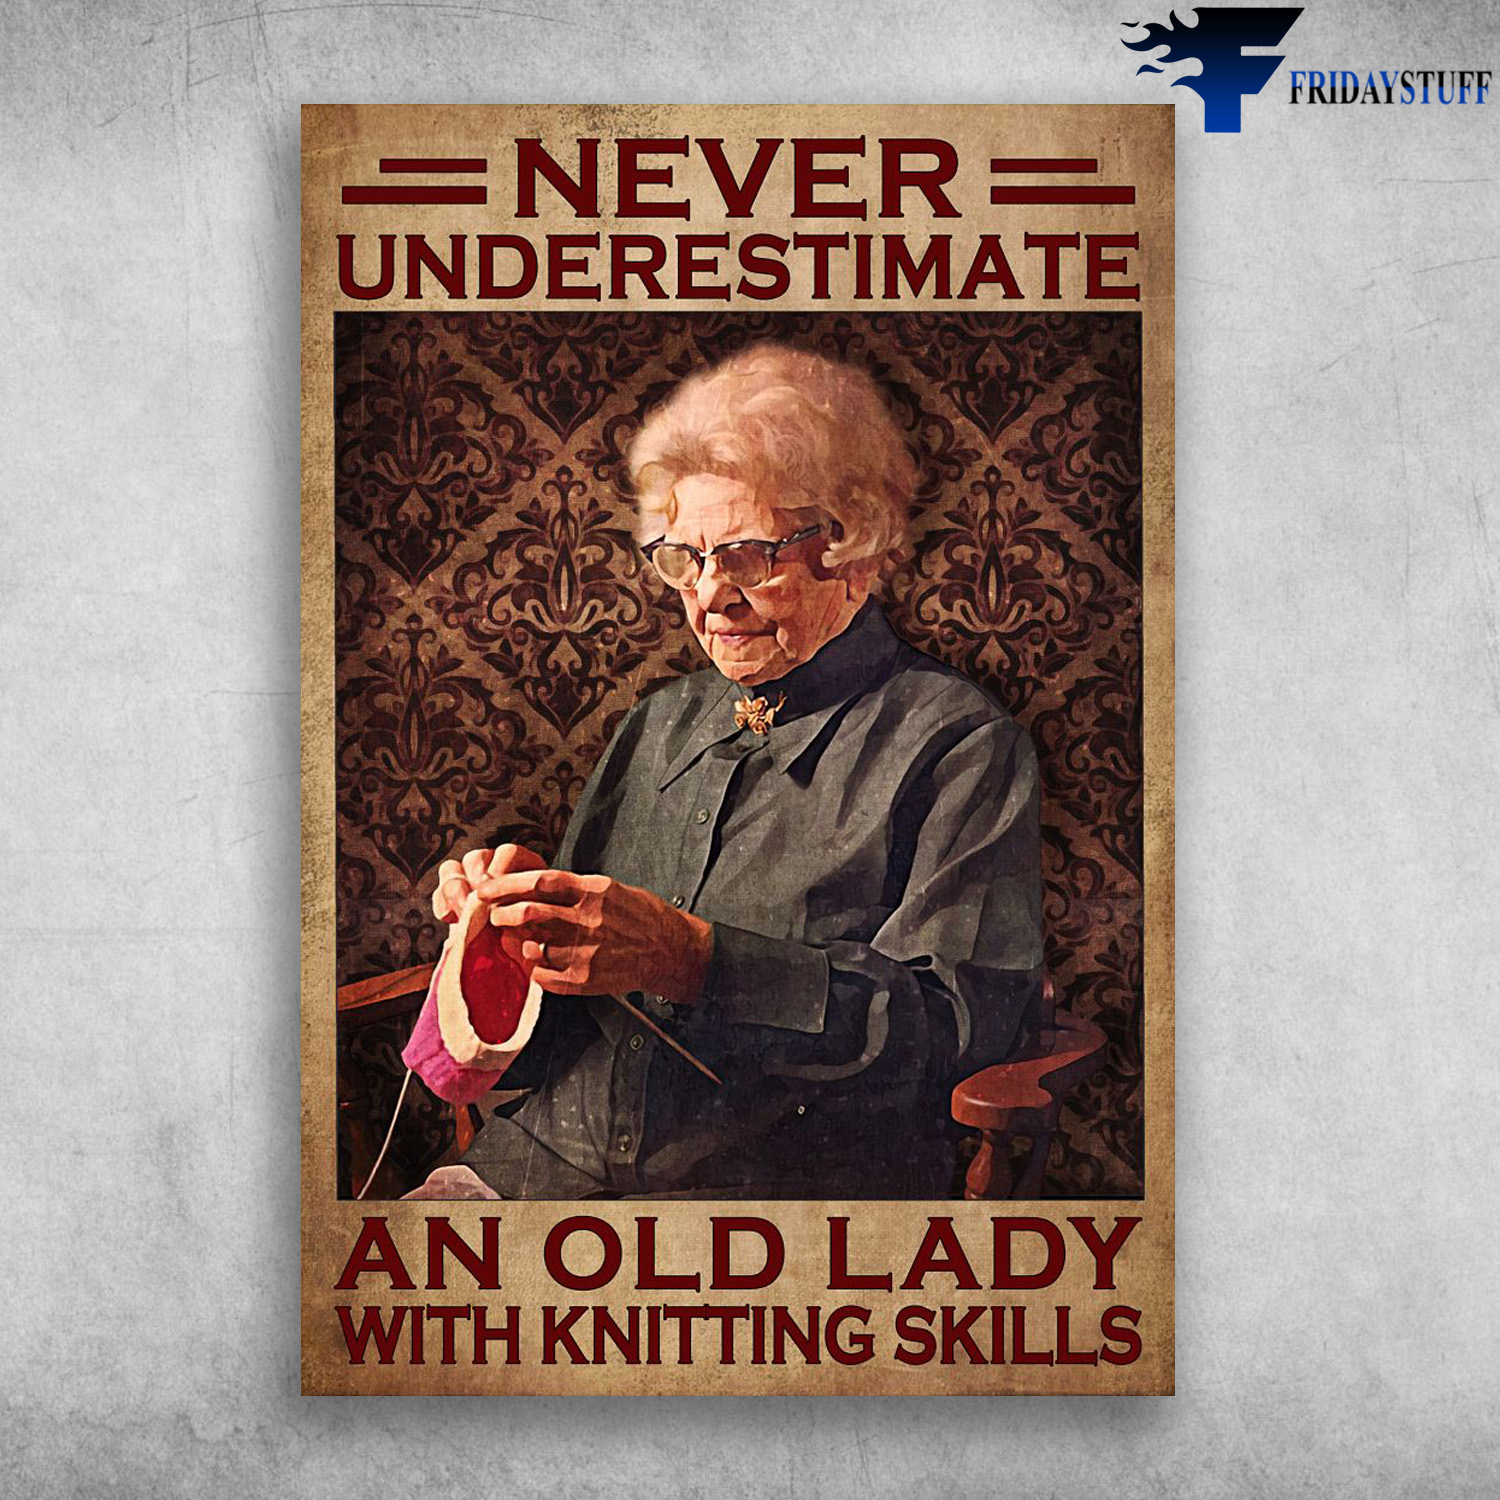 Old Lady Knitting - Never Underestimate, And Old Lady, With Knitting Skills